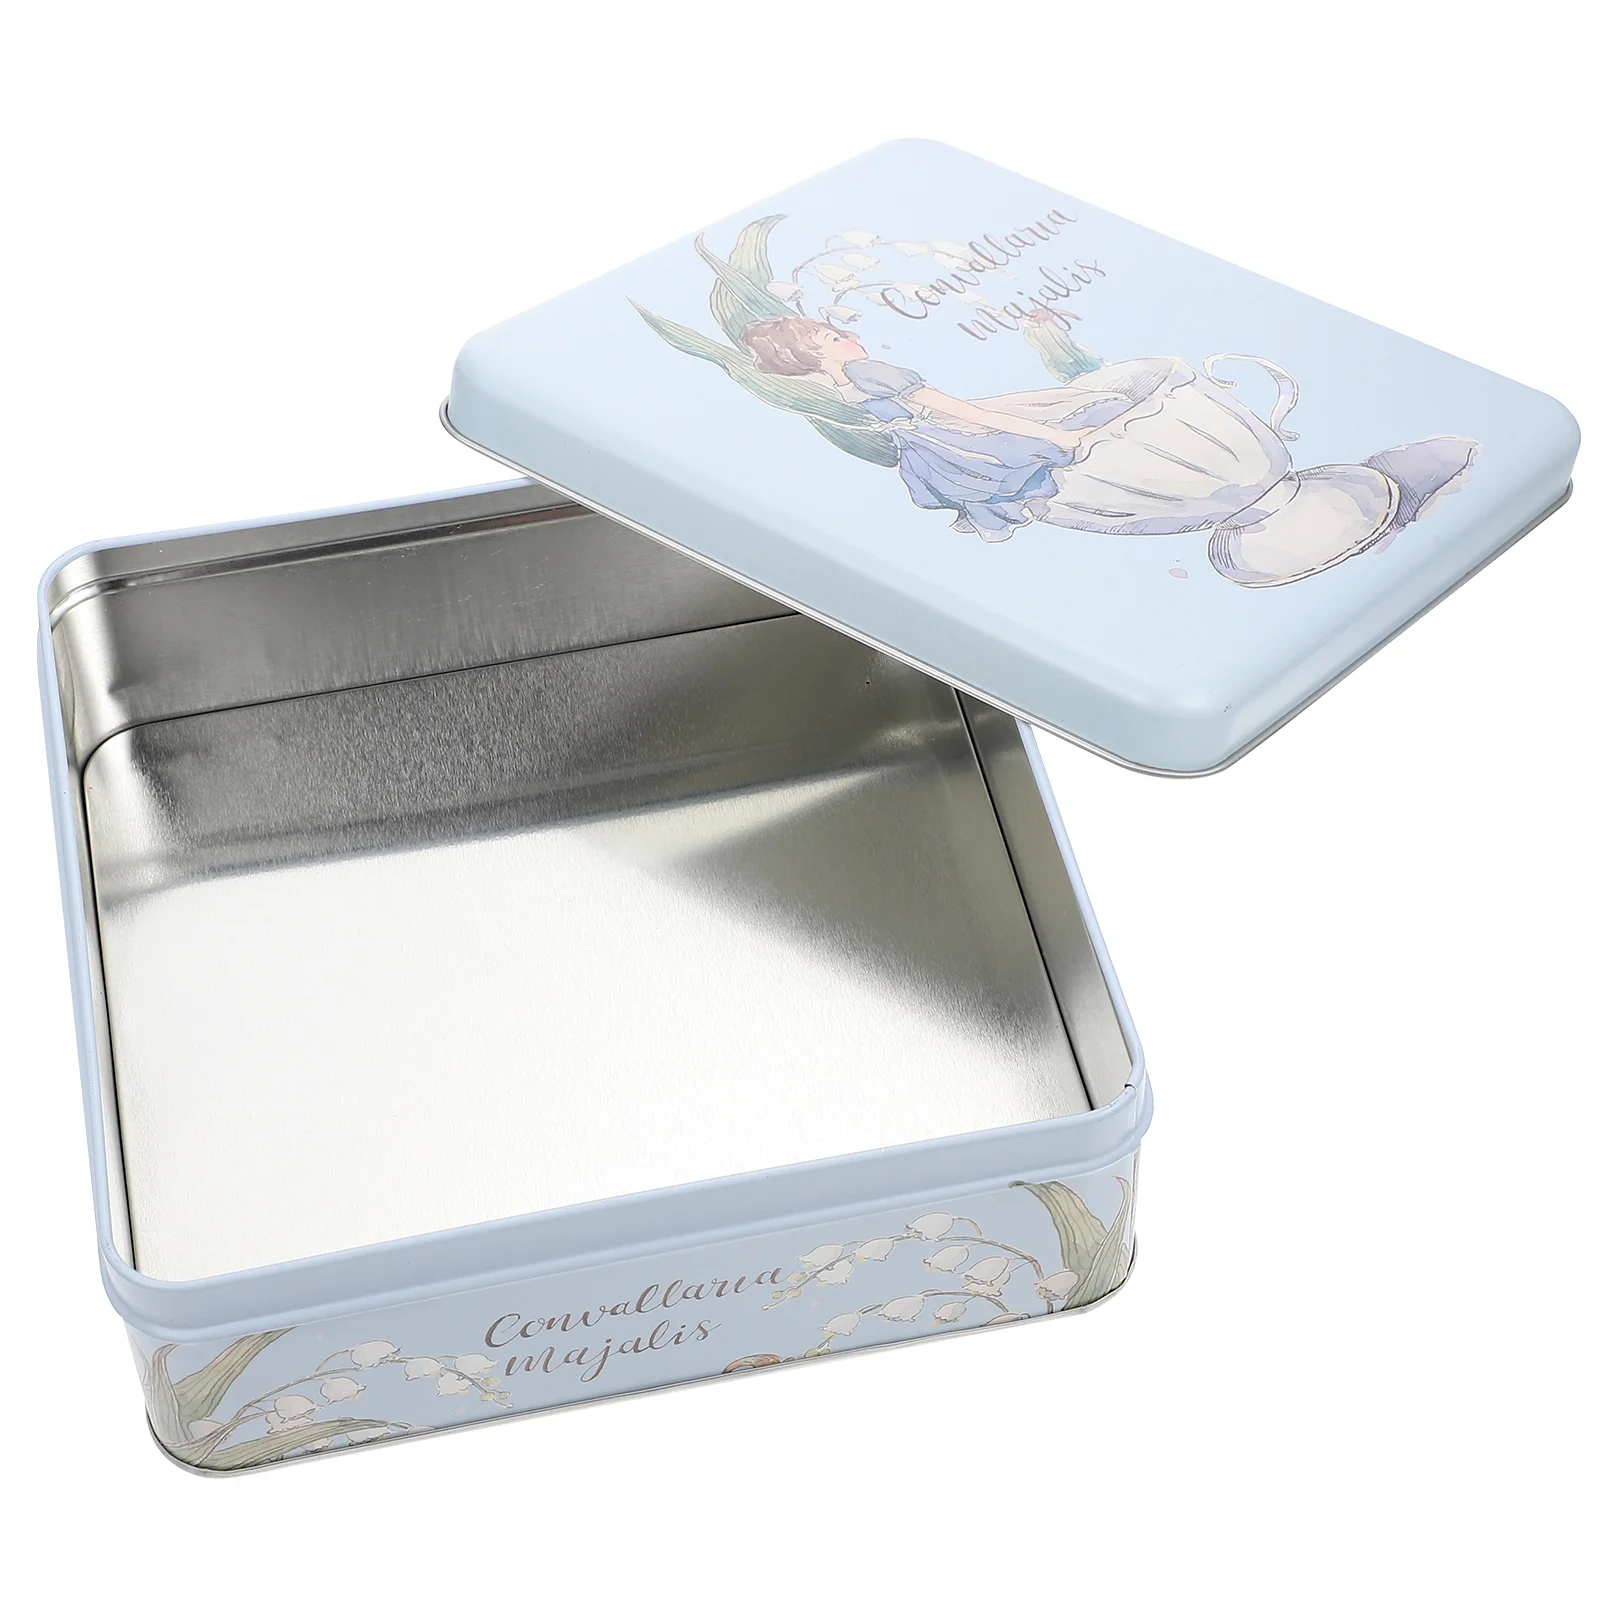 Gift Boxes Lids Presents Cookie Tins Lids Cookie Storage Tins Rectangular Cookie Box Rectangular Tinplate Box